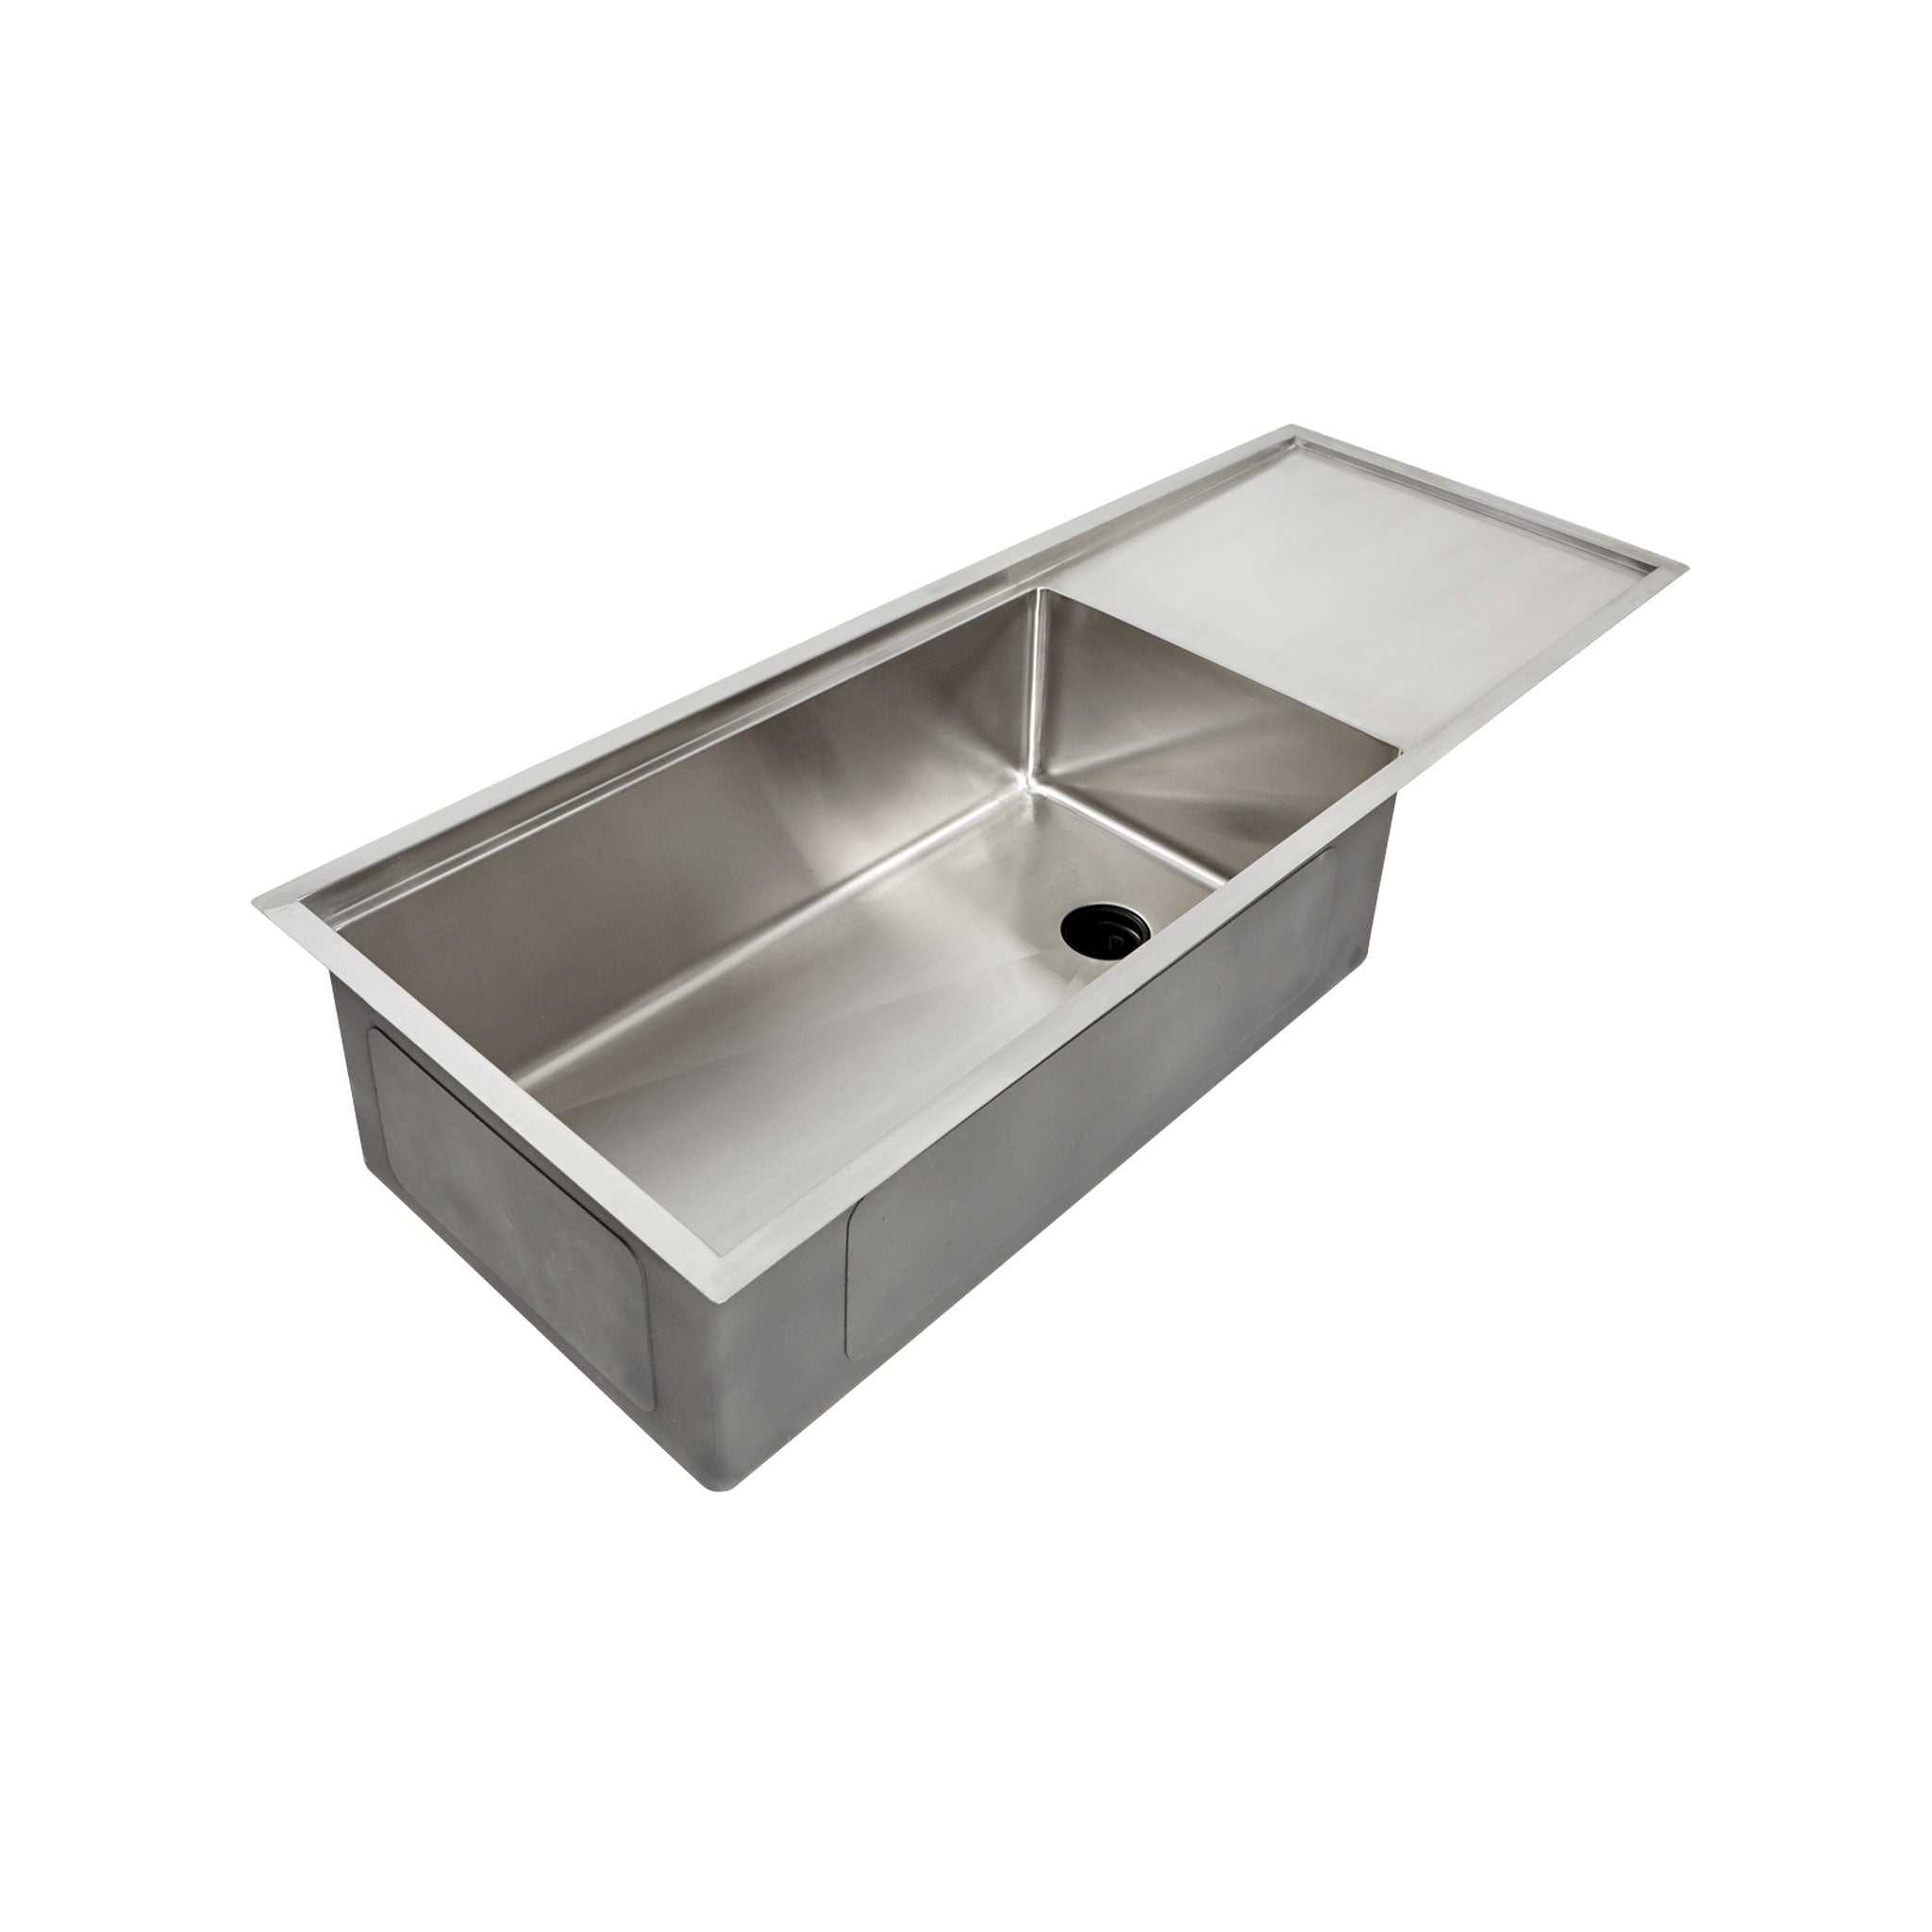 47 inch 16 gauge stainless steel undermount single basin drainboard workstation sink with offset seamless drain and 10" depth